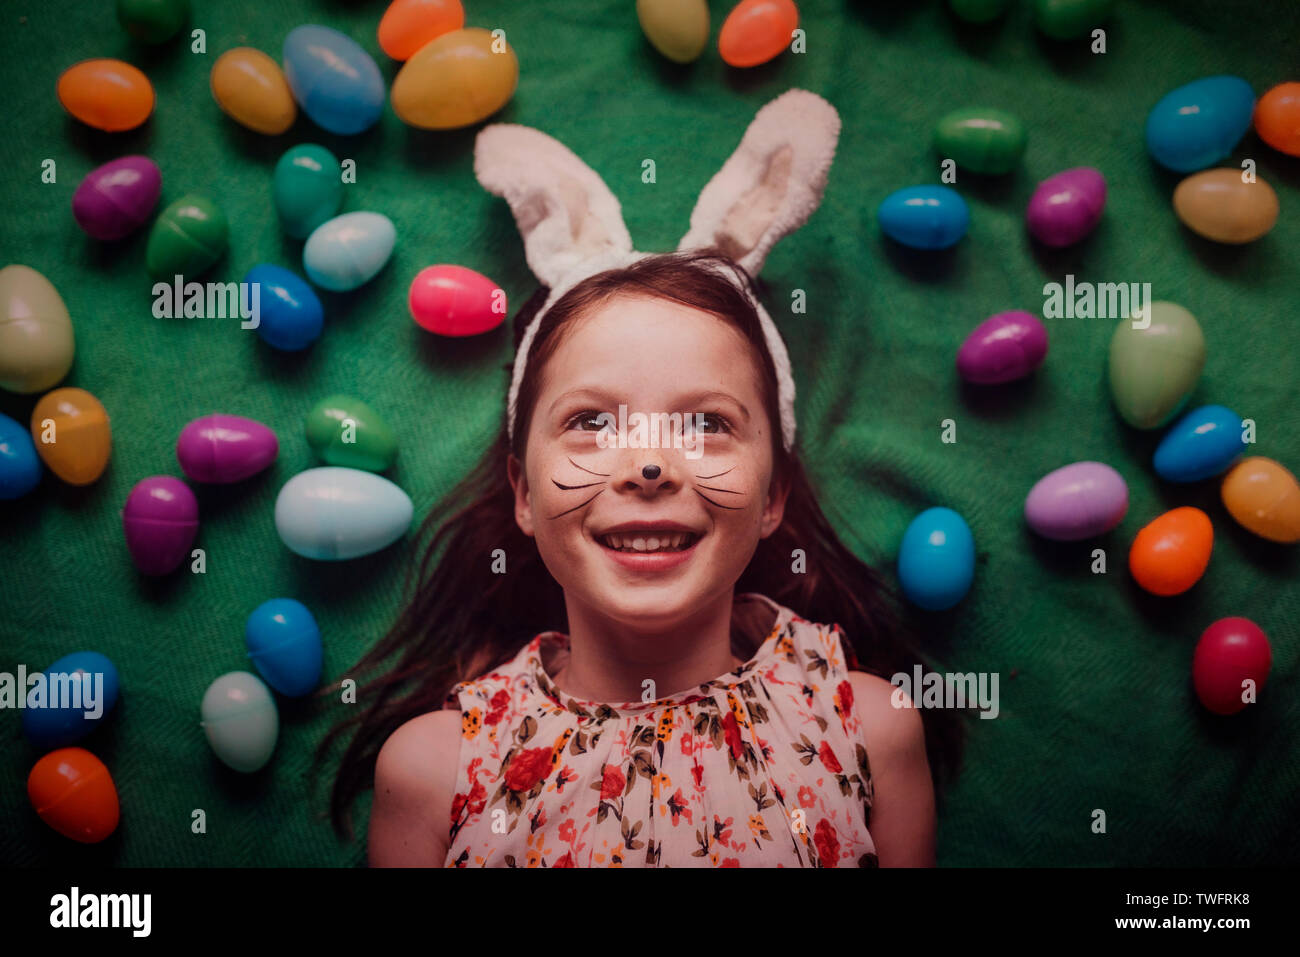 Overhead portrait of young girl wearing bunny ears surrounded by Easter eggs Stock Photo